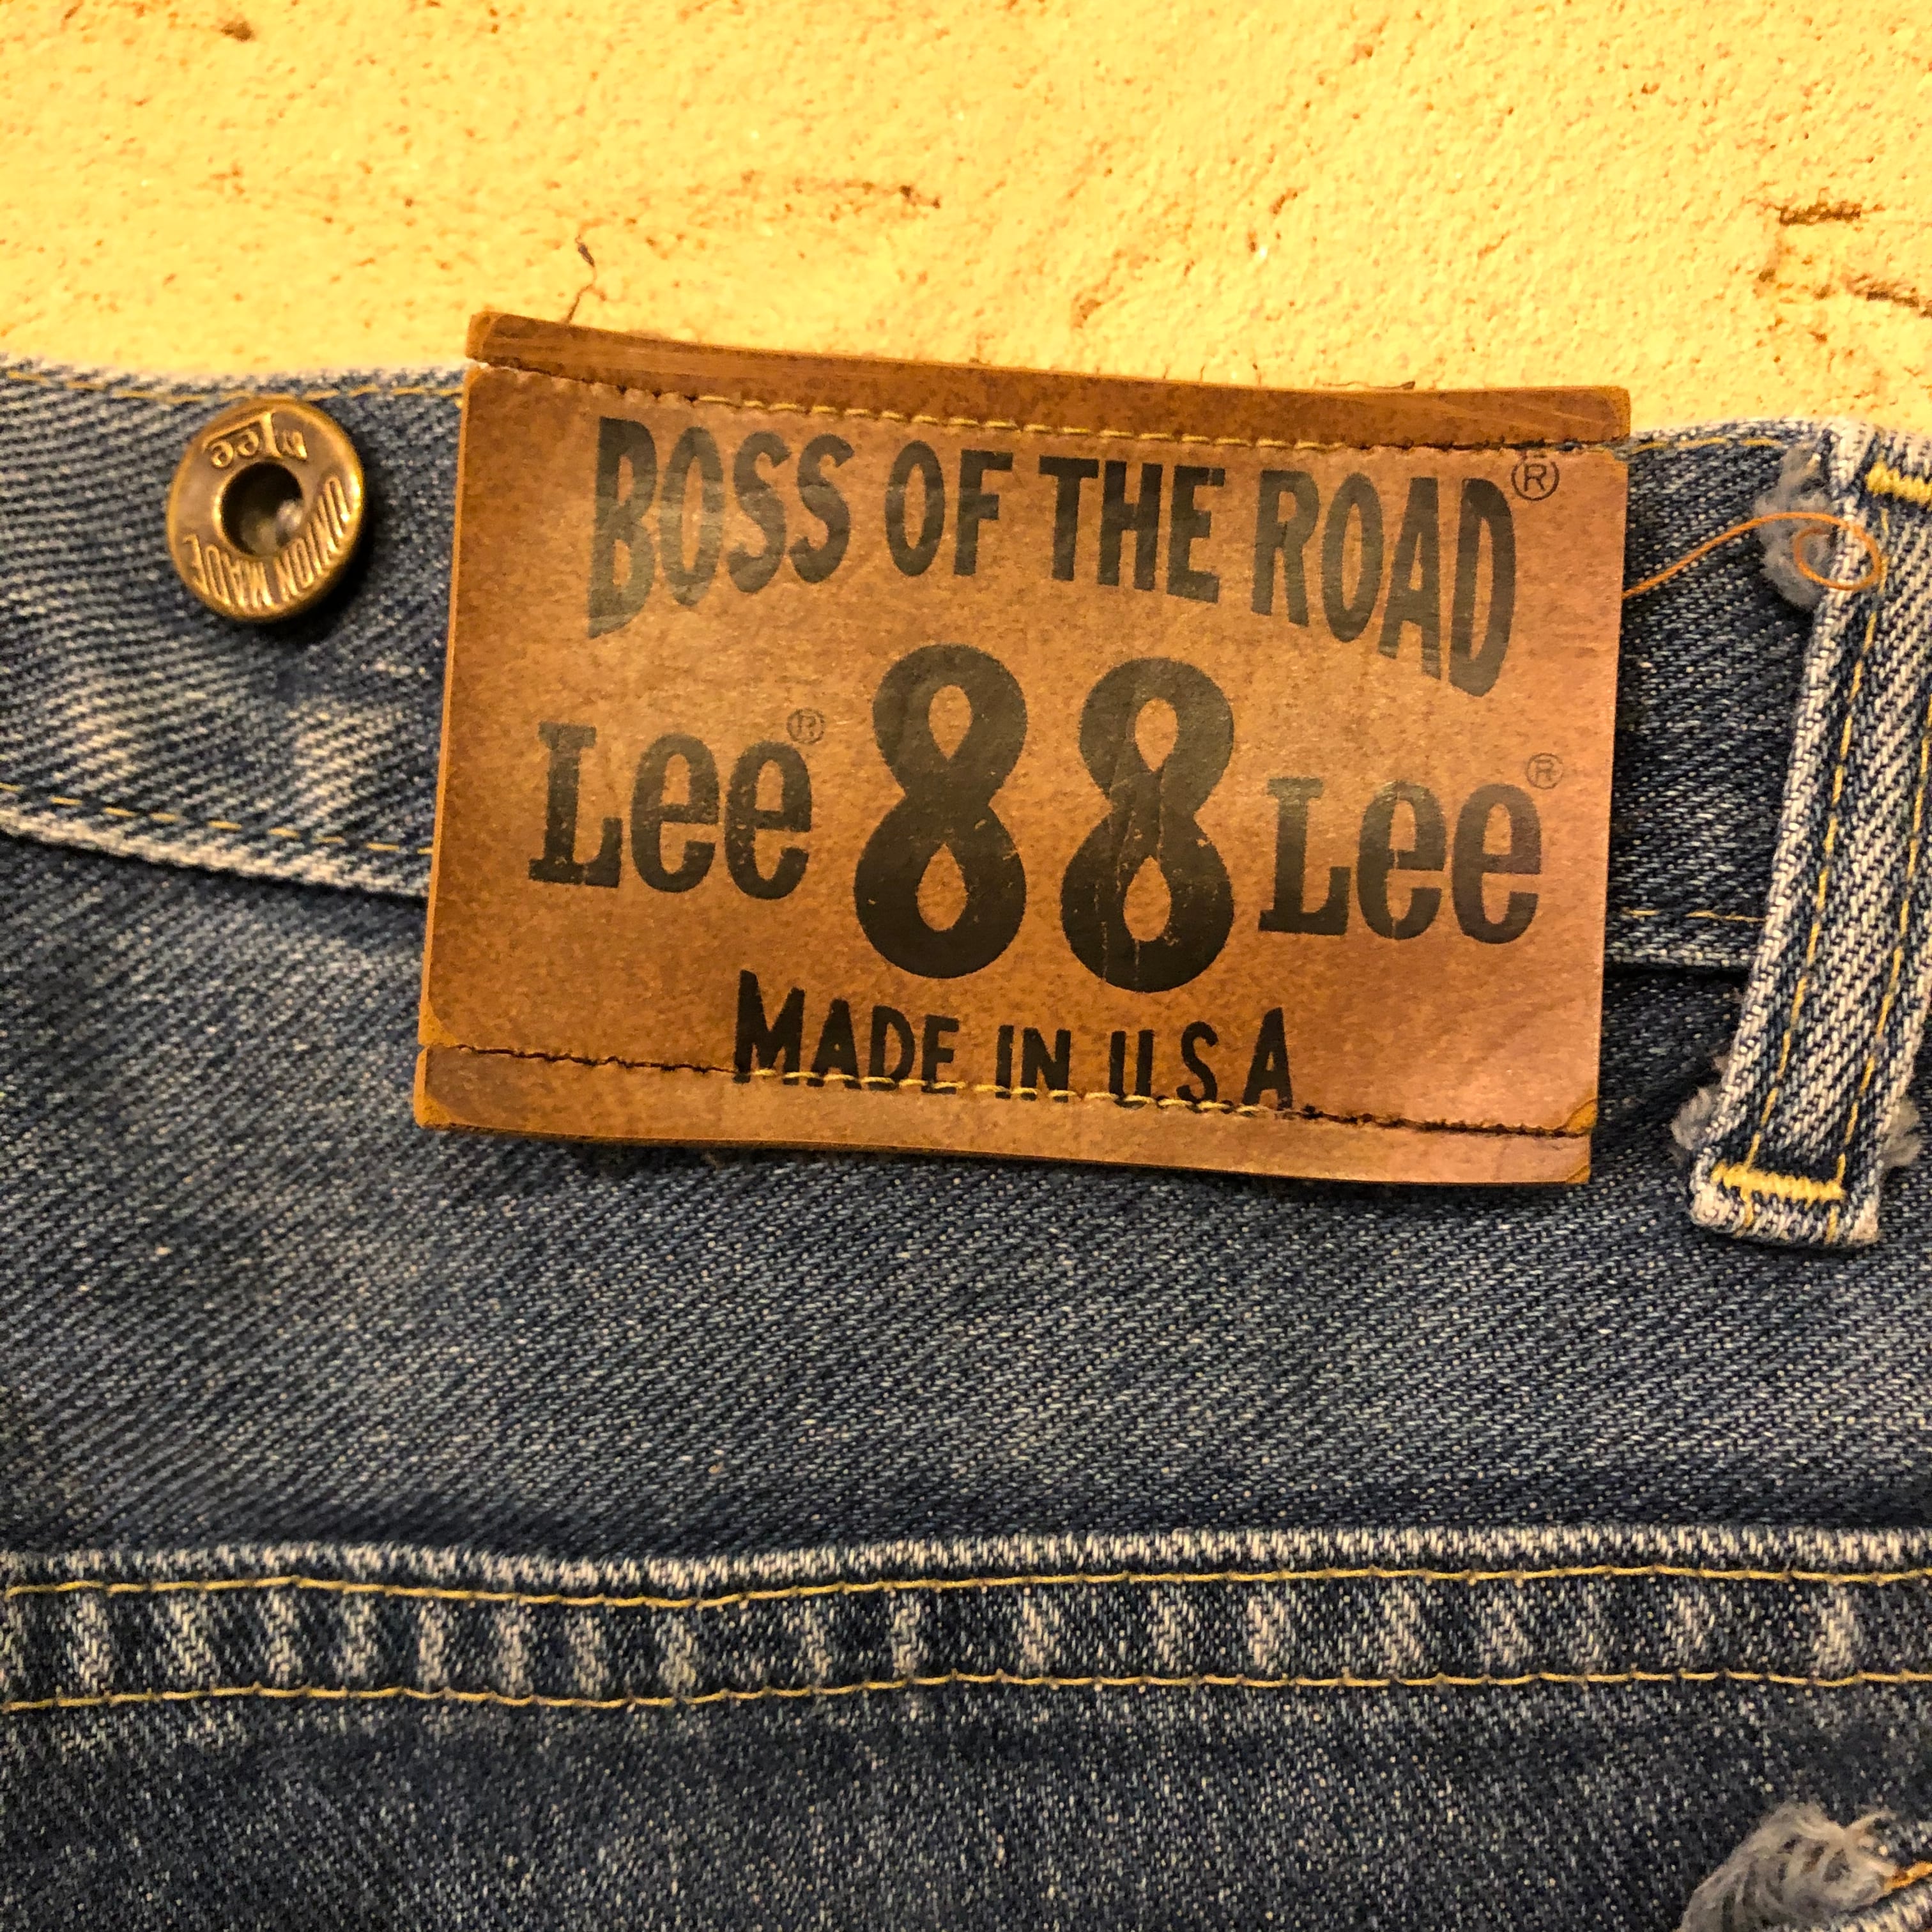 Lee BOSS OF THE ROAD ロガーパンツ Vintage 70s-